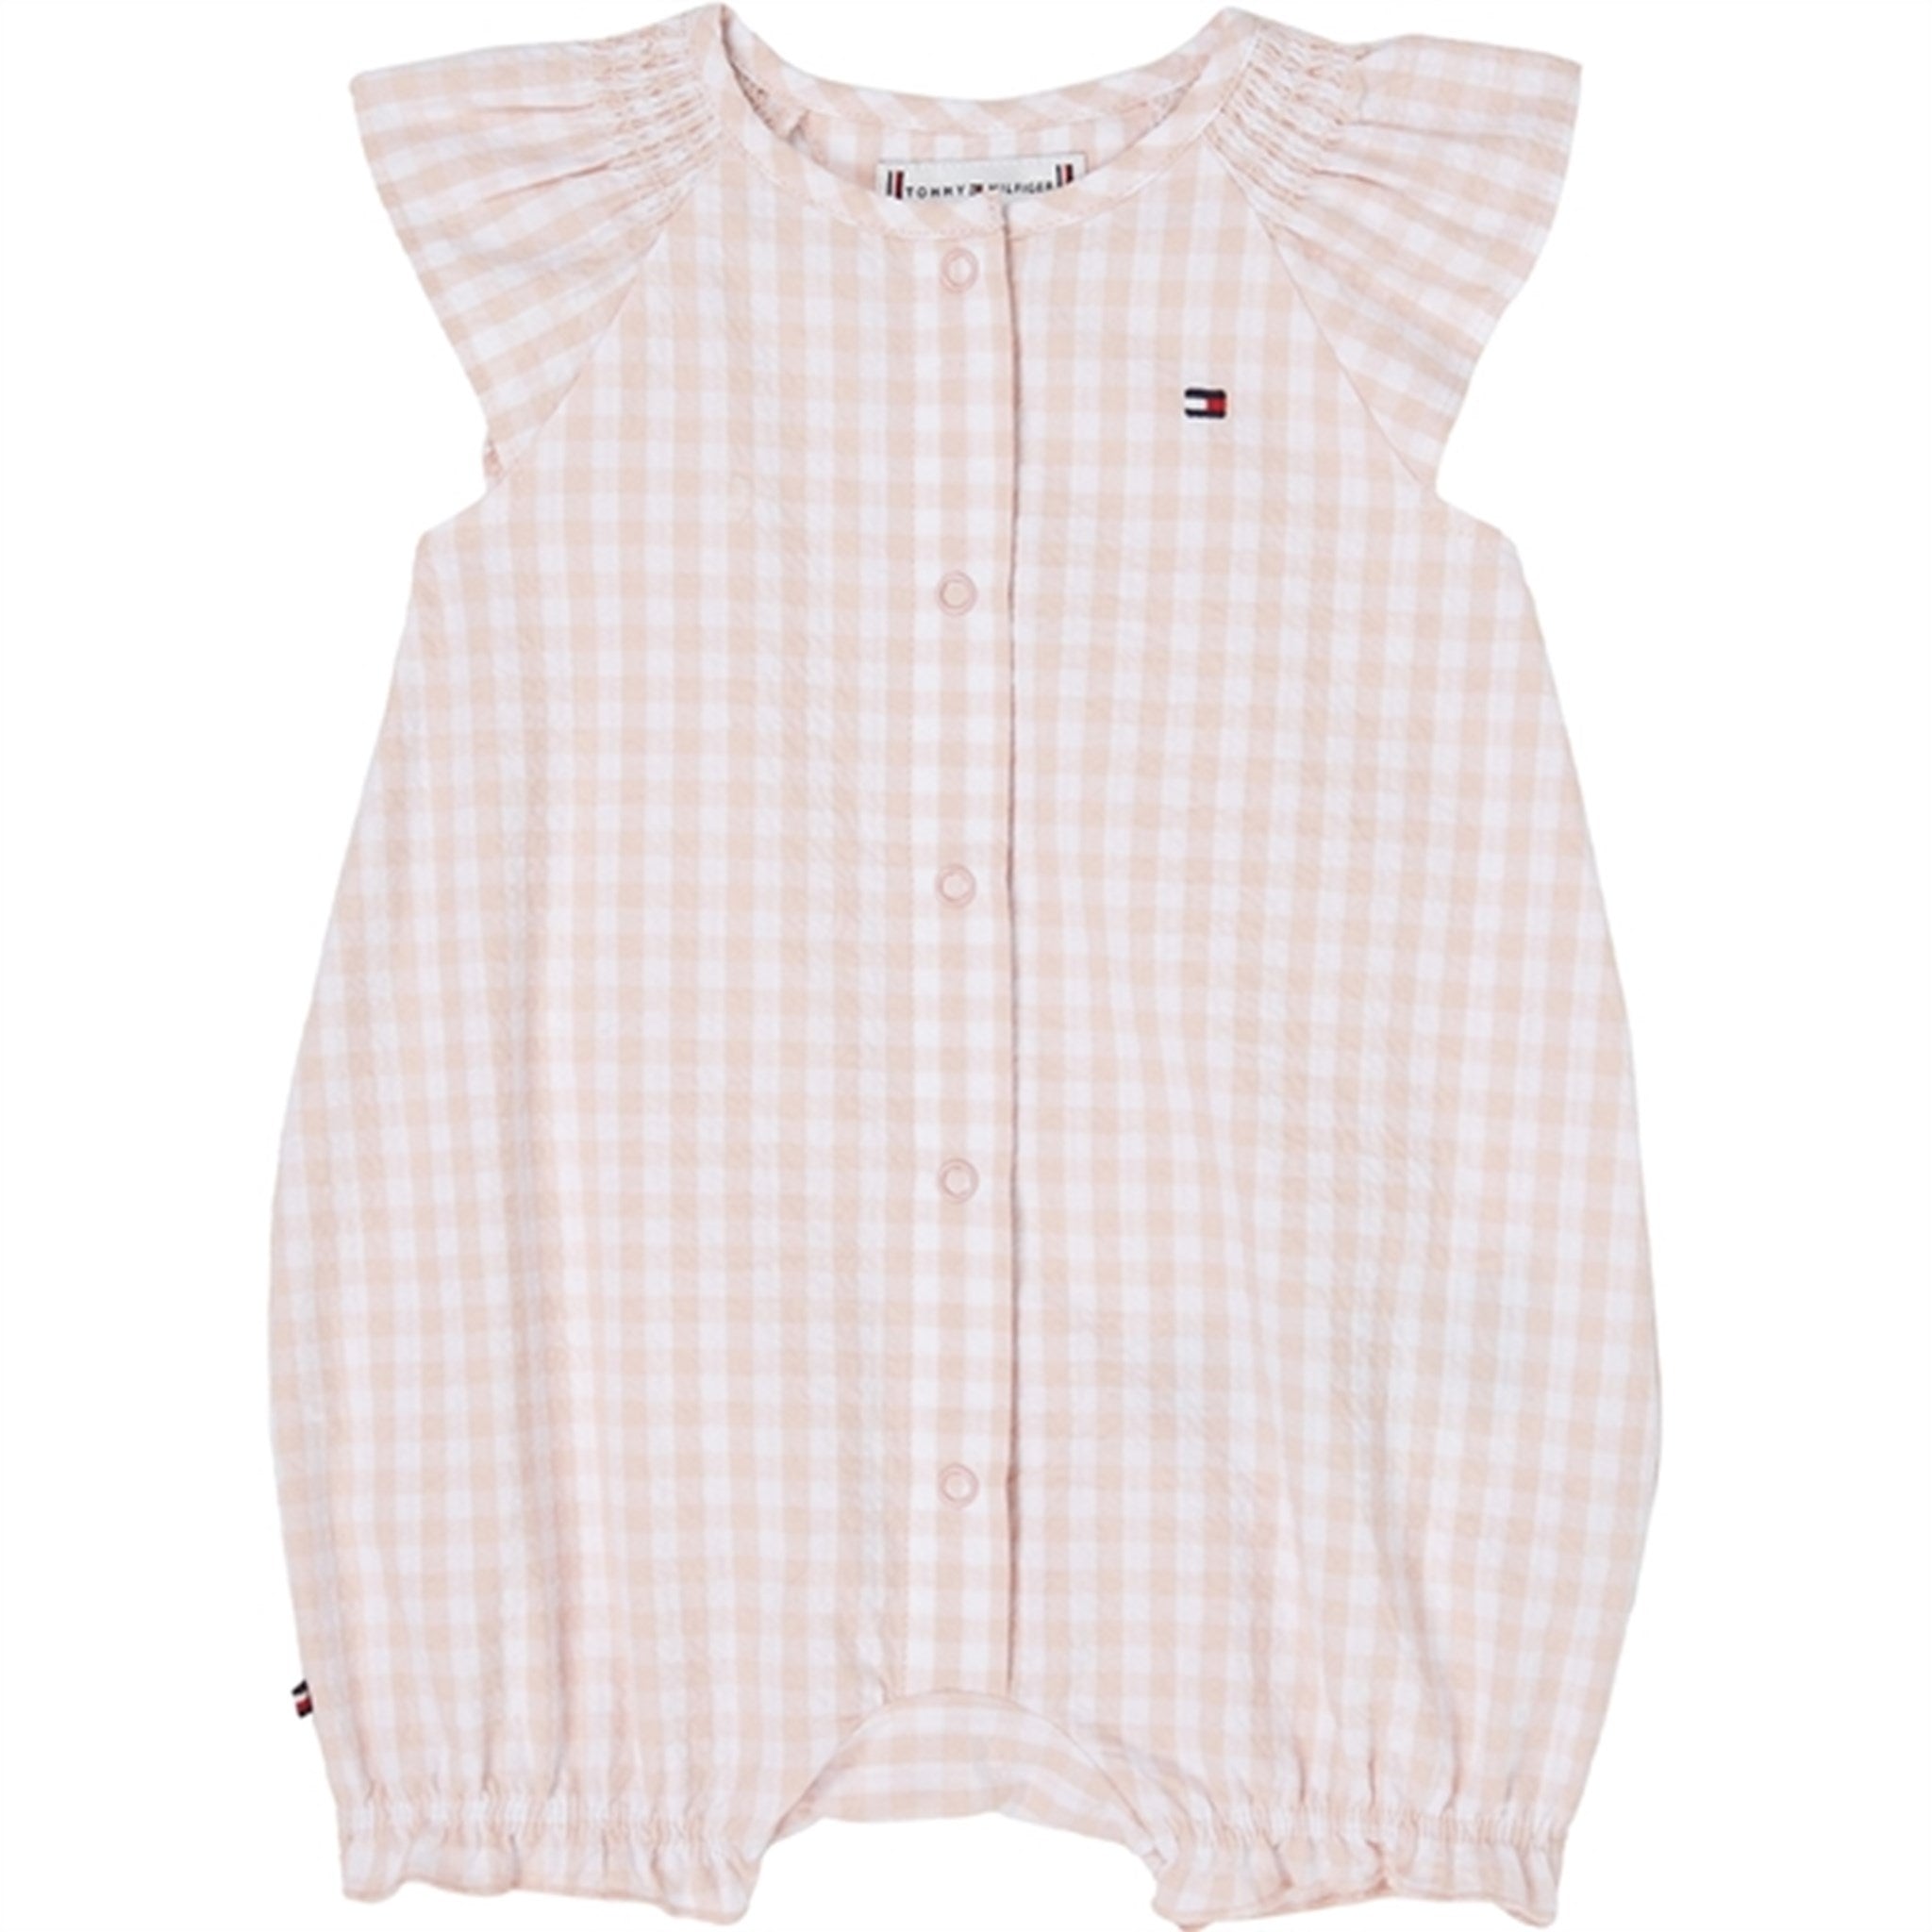 Tommy Hilfiger Baby Ruffle Gingham Sommerdragt White / Pink Check - Str. 74